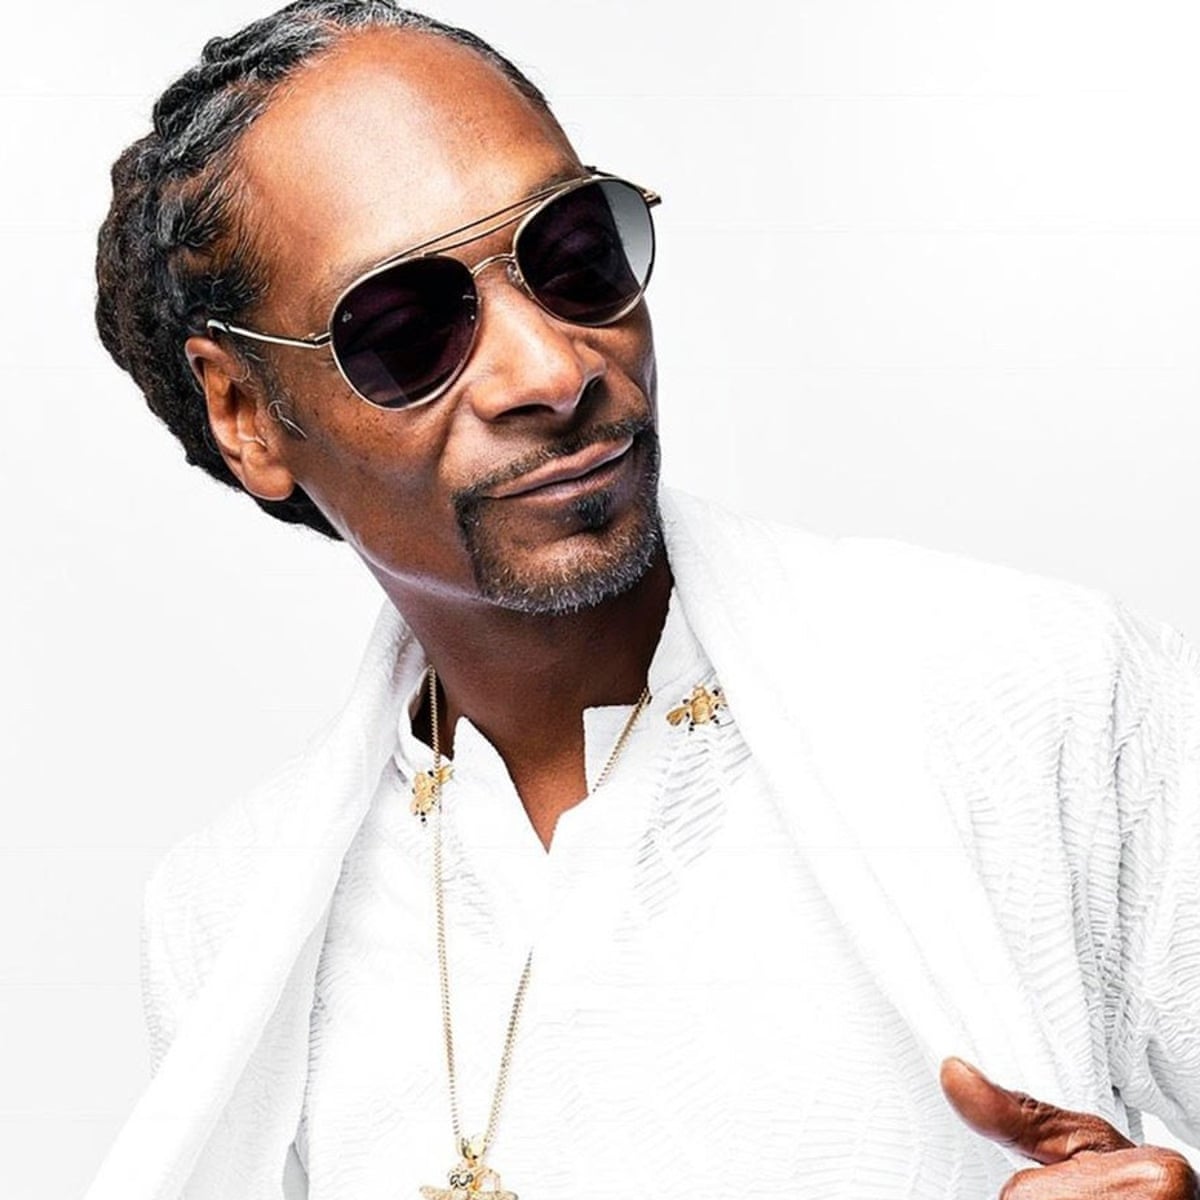 Snoop Dogg: The Algorithm review – Uncle Snoop presides over all